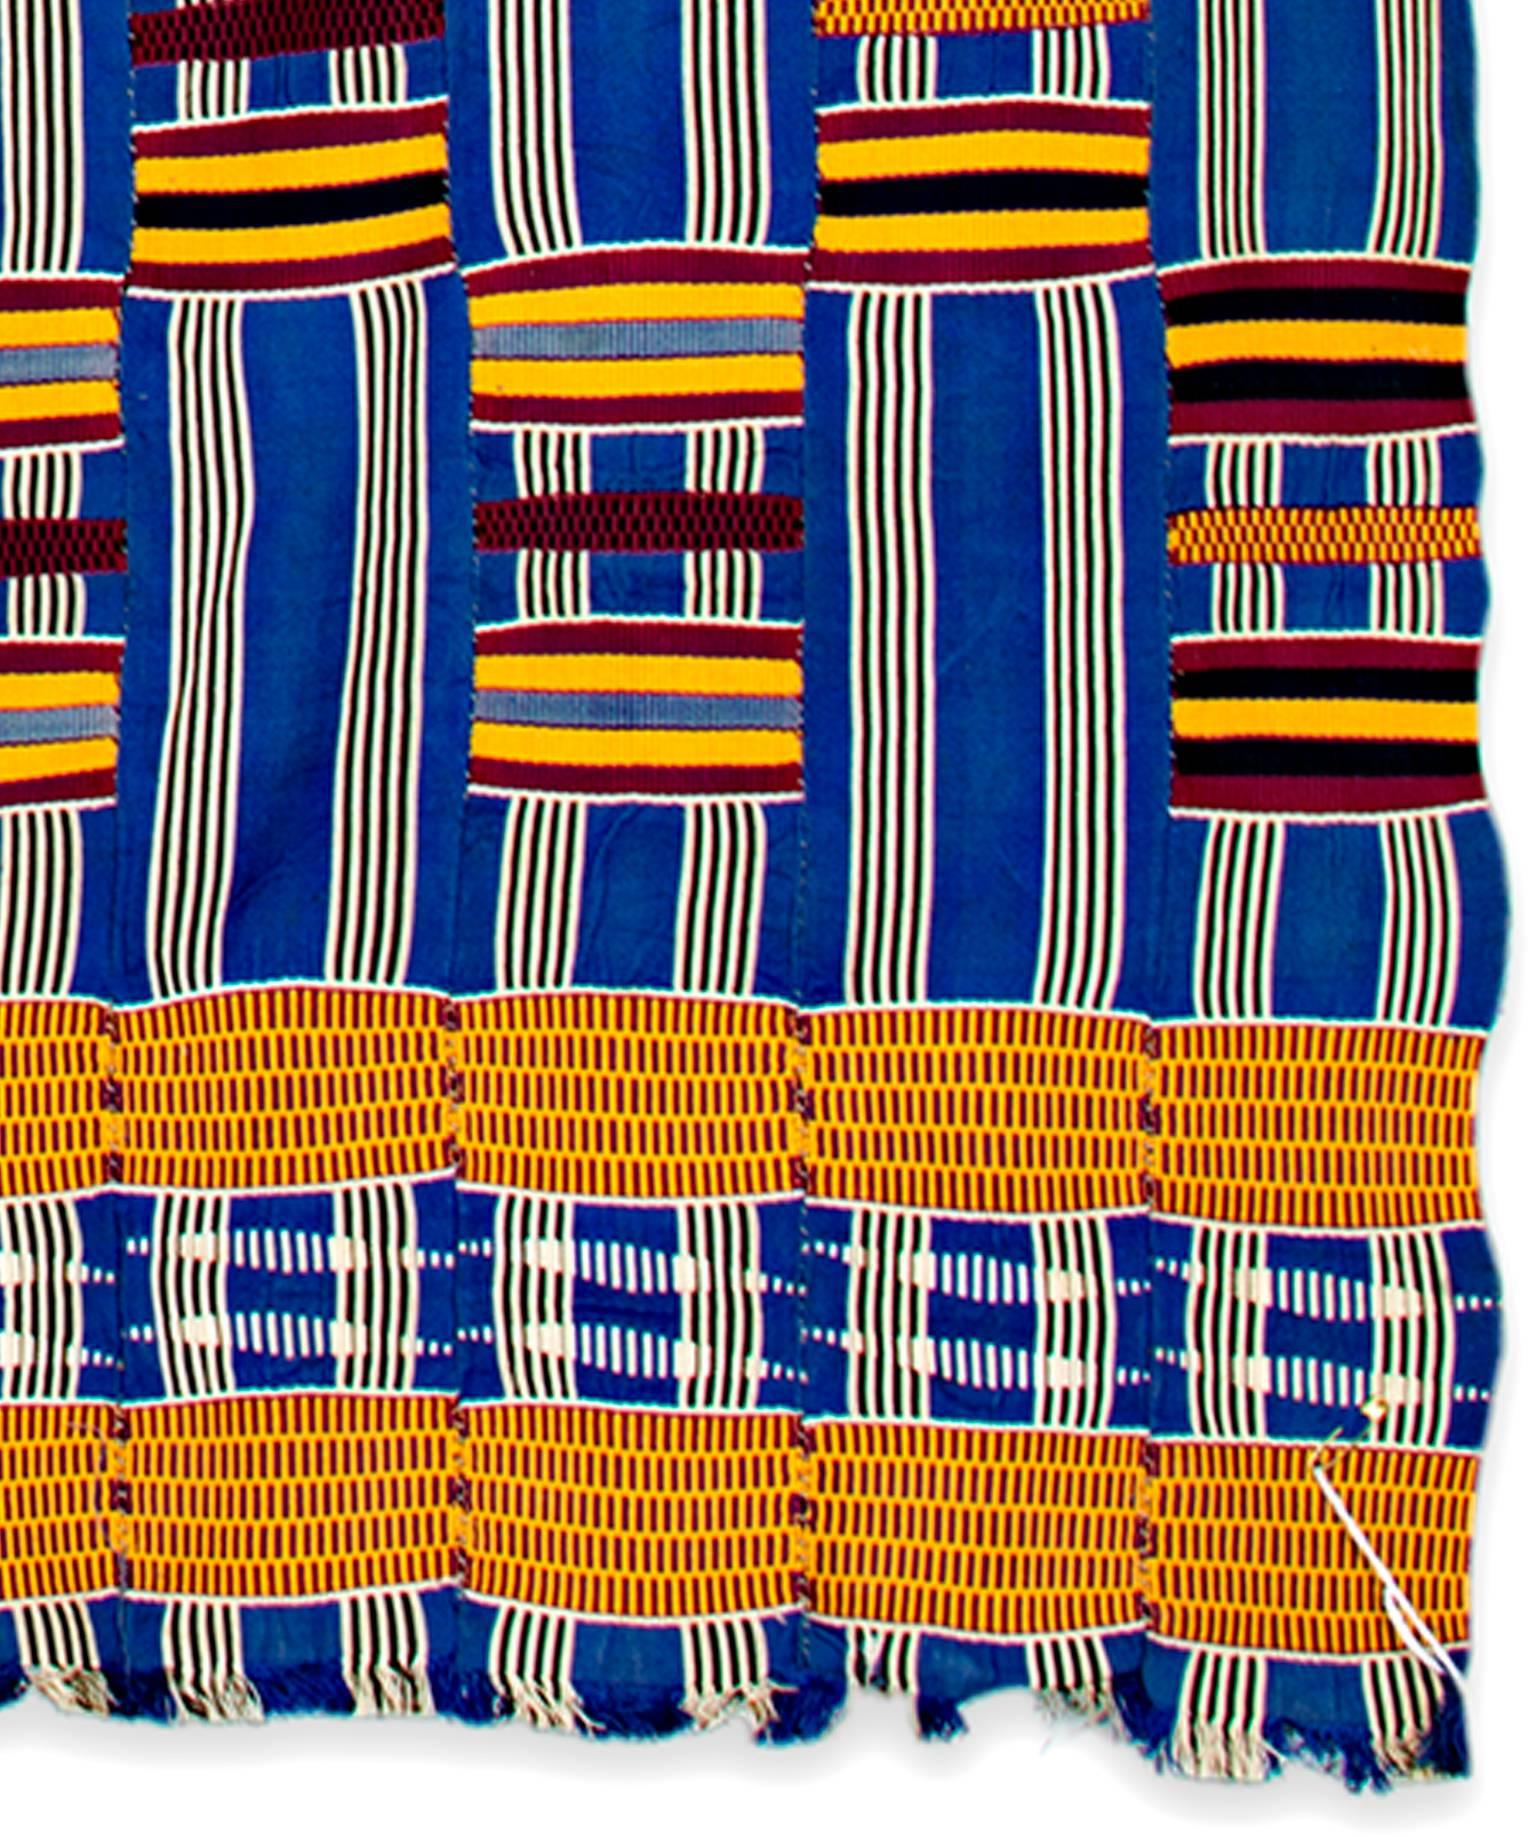 Among the most well-known West African textiles is kente cloth, woven by the Ewe and Asante peoples of Ghana. The word kente is not used by the Asante people; it may be derived from the Fante word kenten (